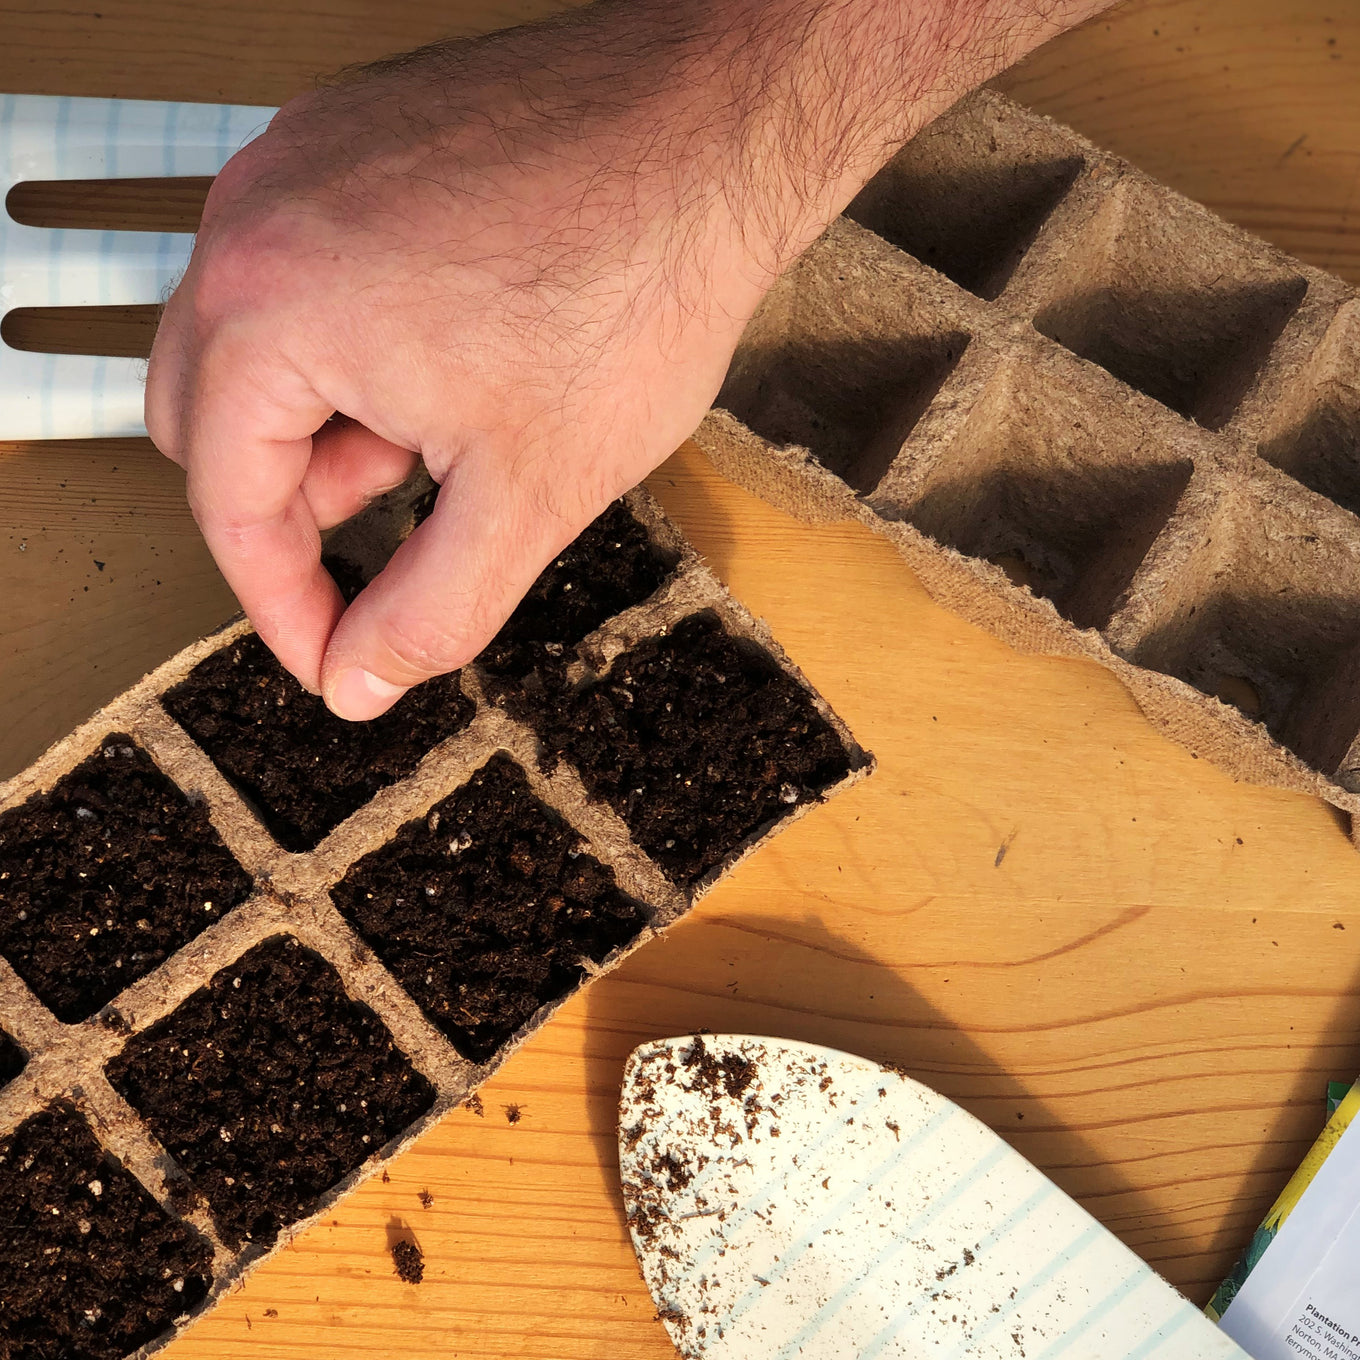 Sowing Organic Evergreen Bunching Onion Seeds into biodegradable Jiffy peat strip trays filled with sowing medium.